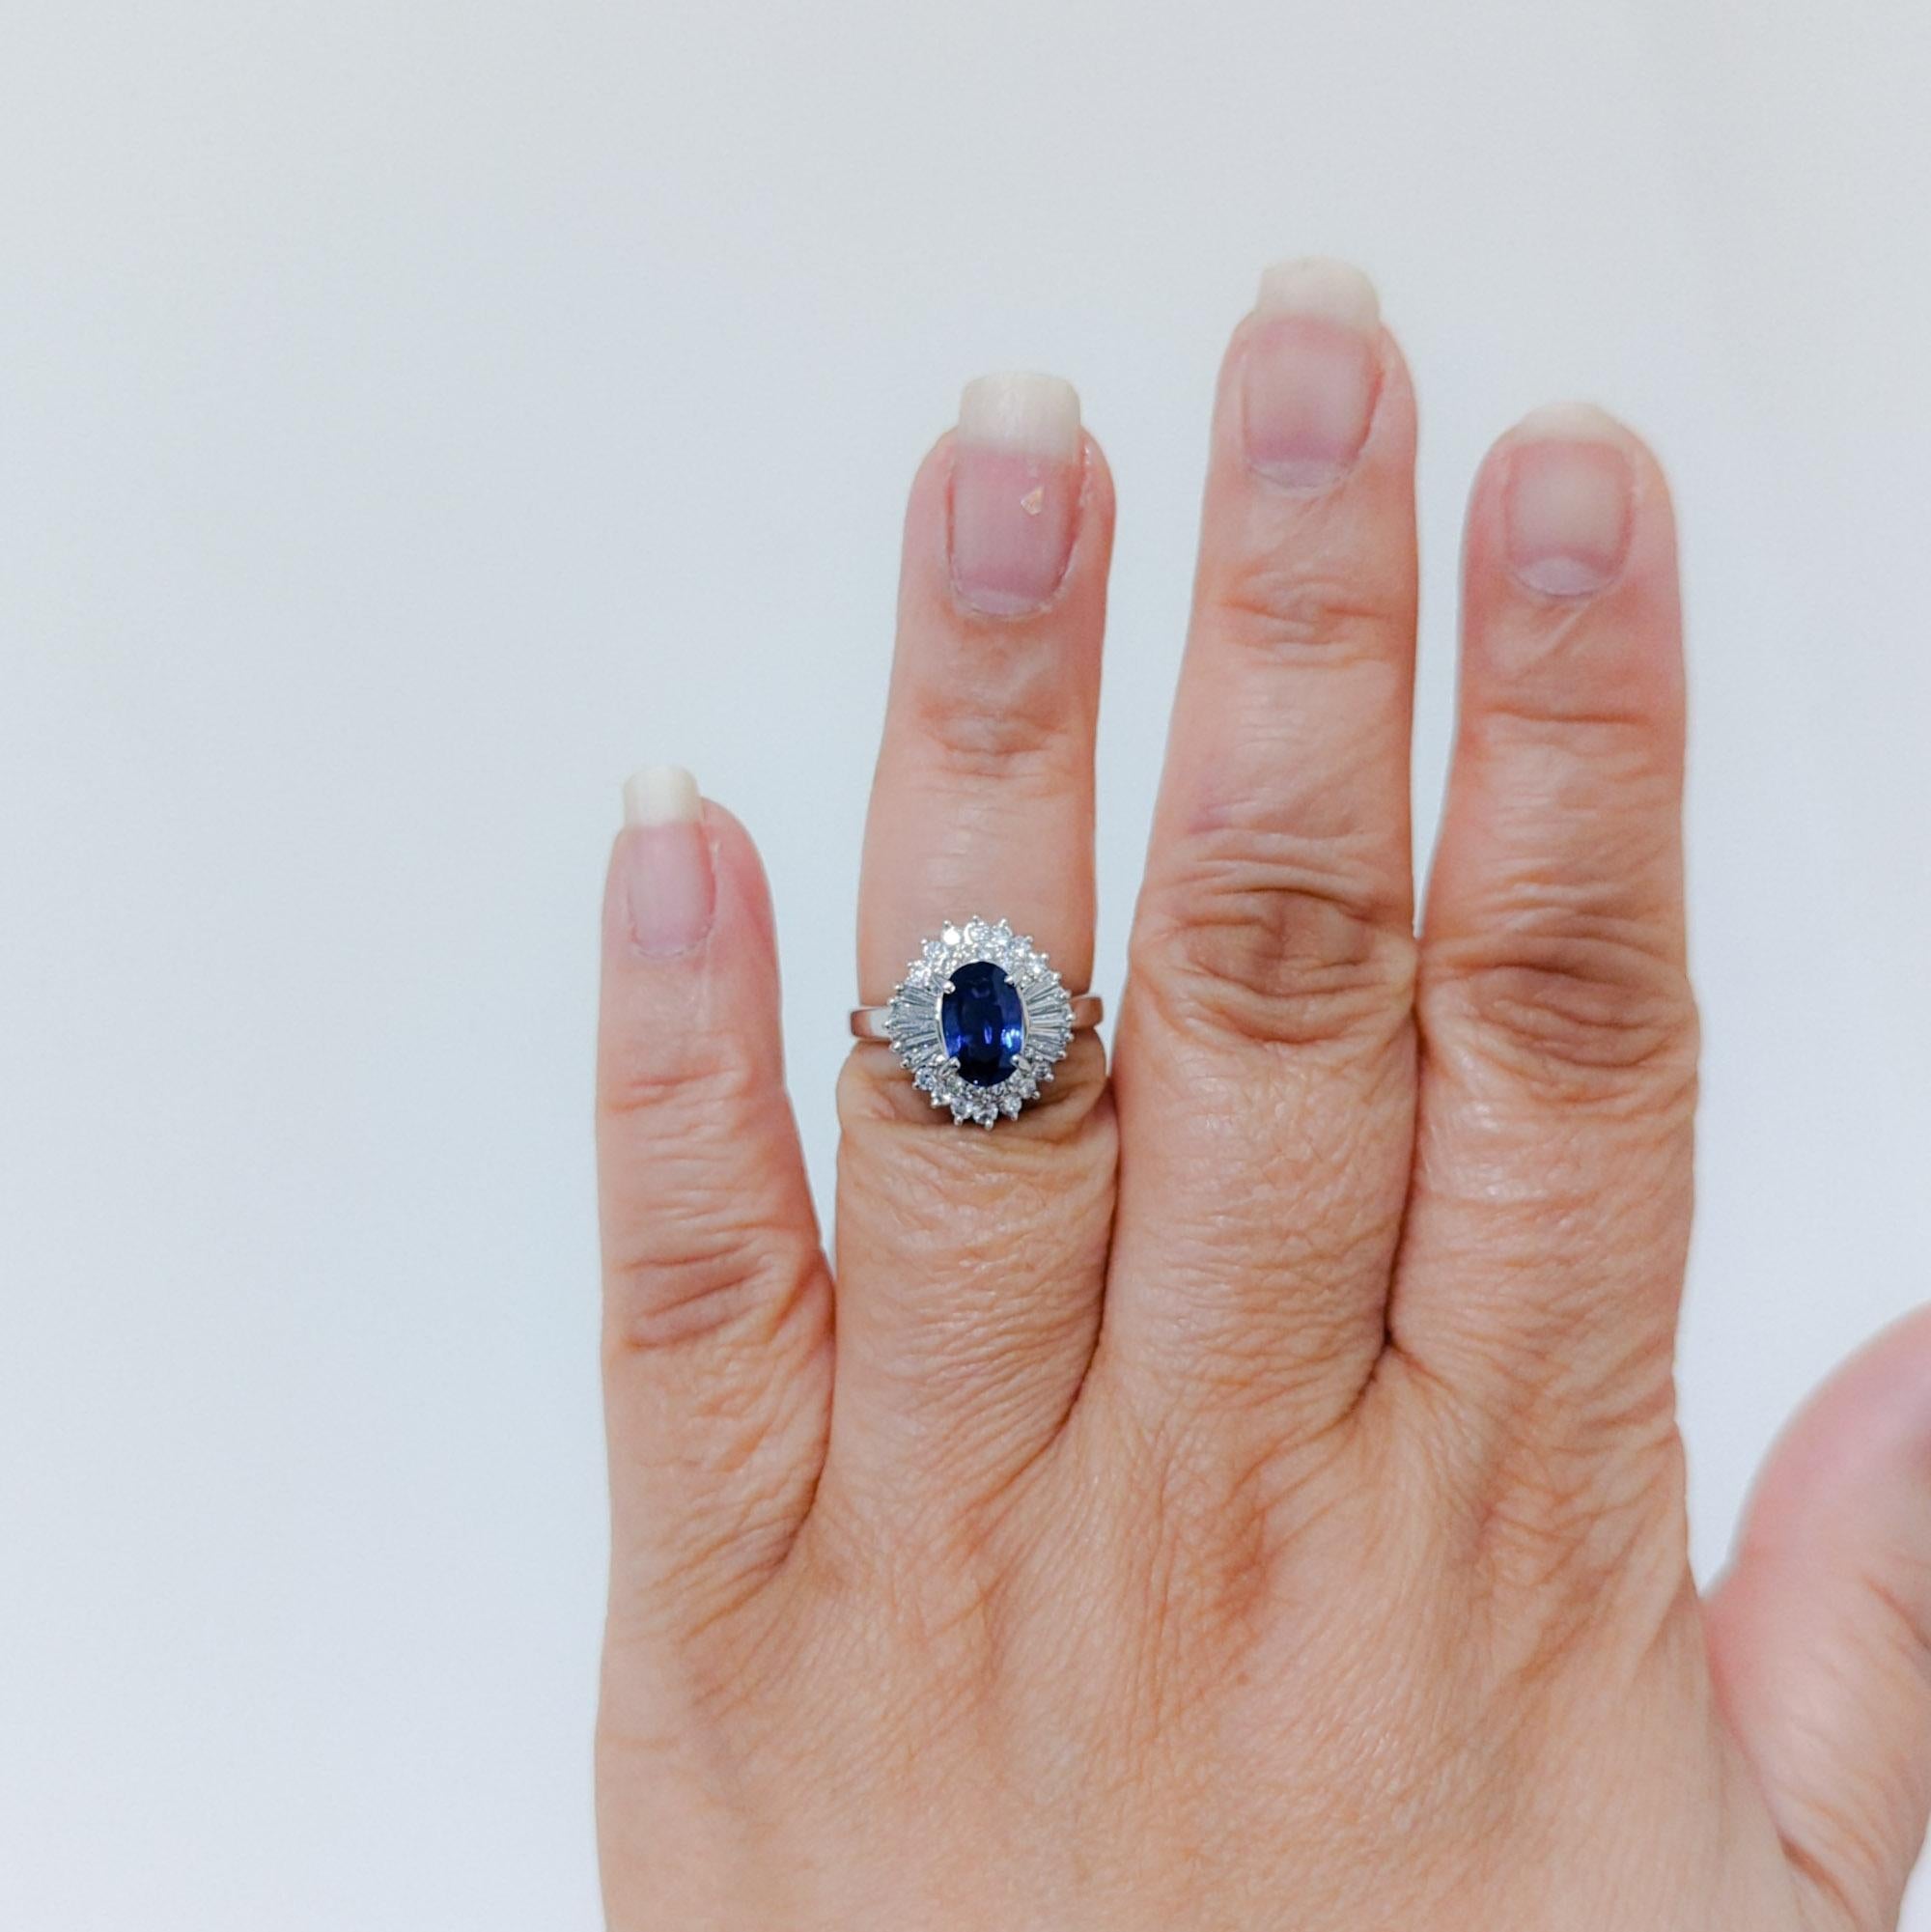 Beautiful 1.58 ct. blue sapphire oval with 0.63 ct. good quality, white, and bright diamond baguettes.  Handmade in platinum.  Ring size 6.5.